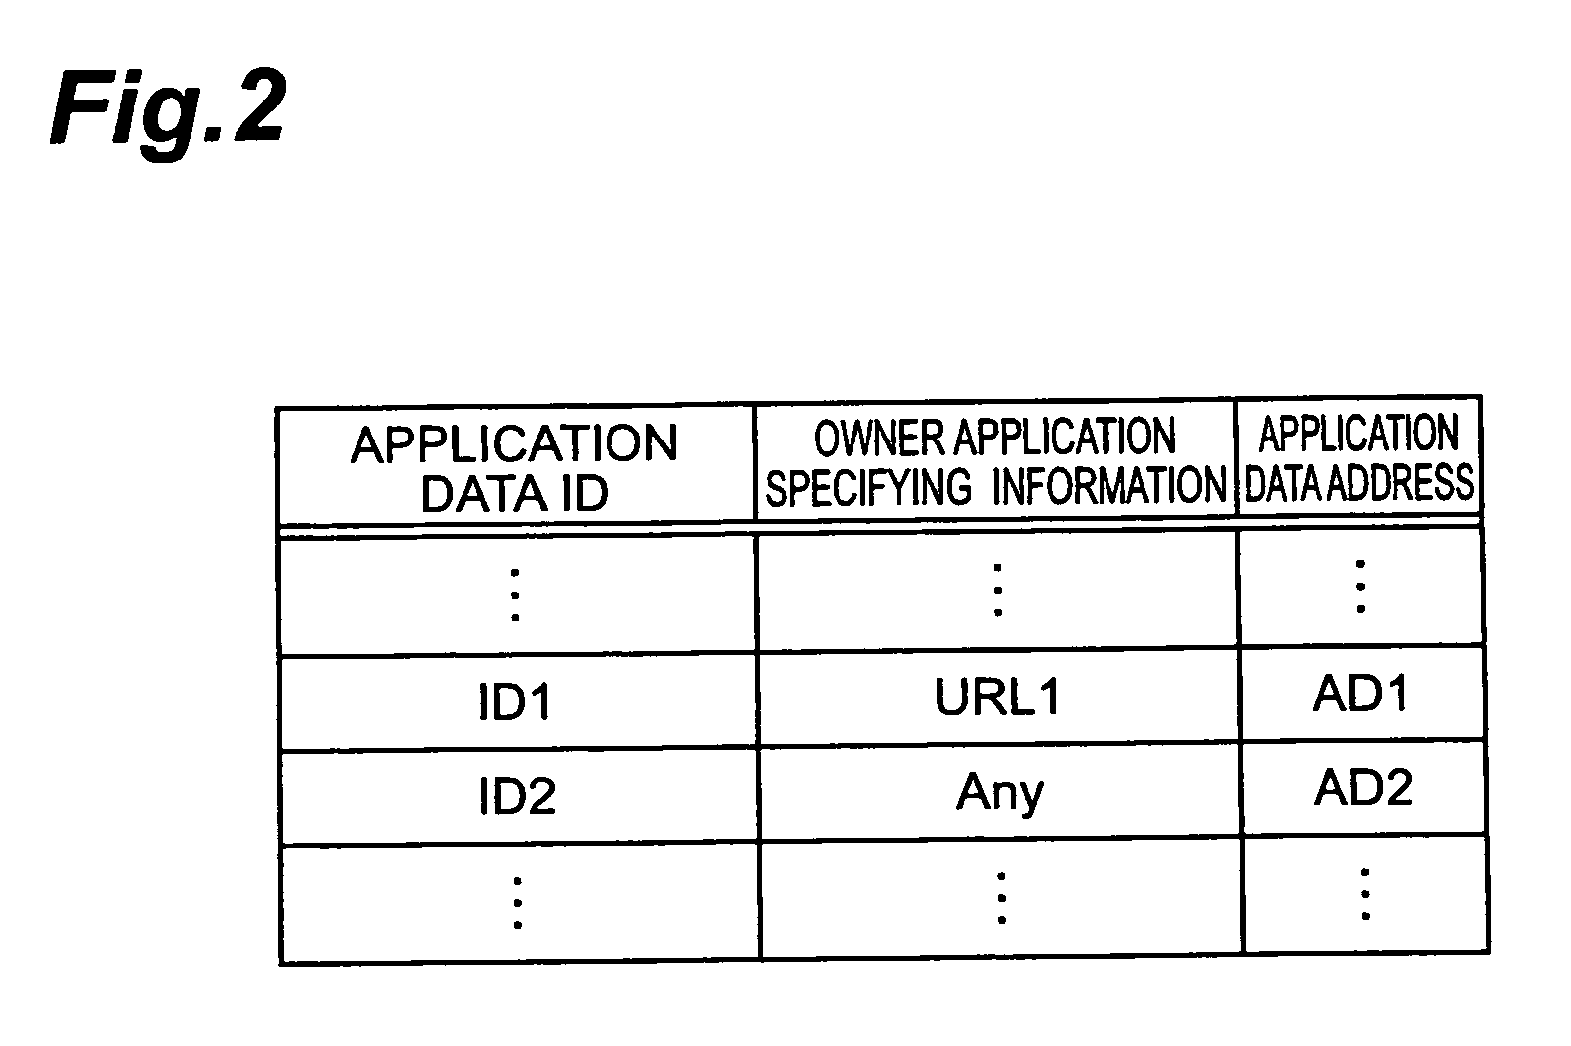 Mobile communication terminal and data access control method